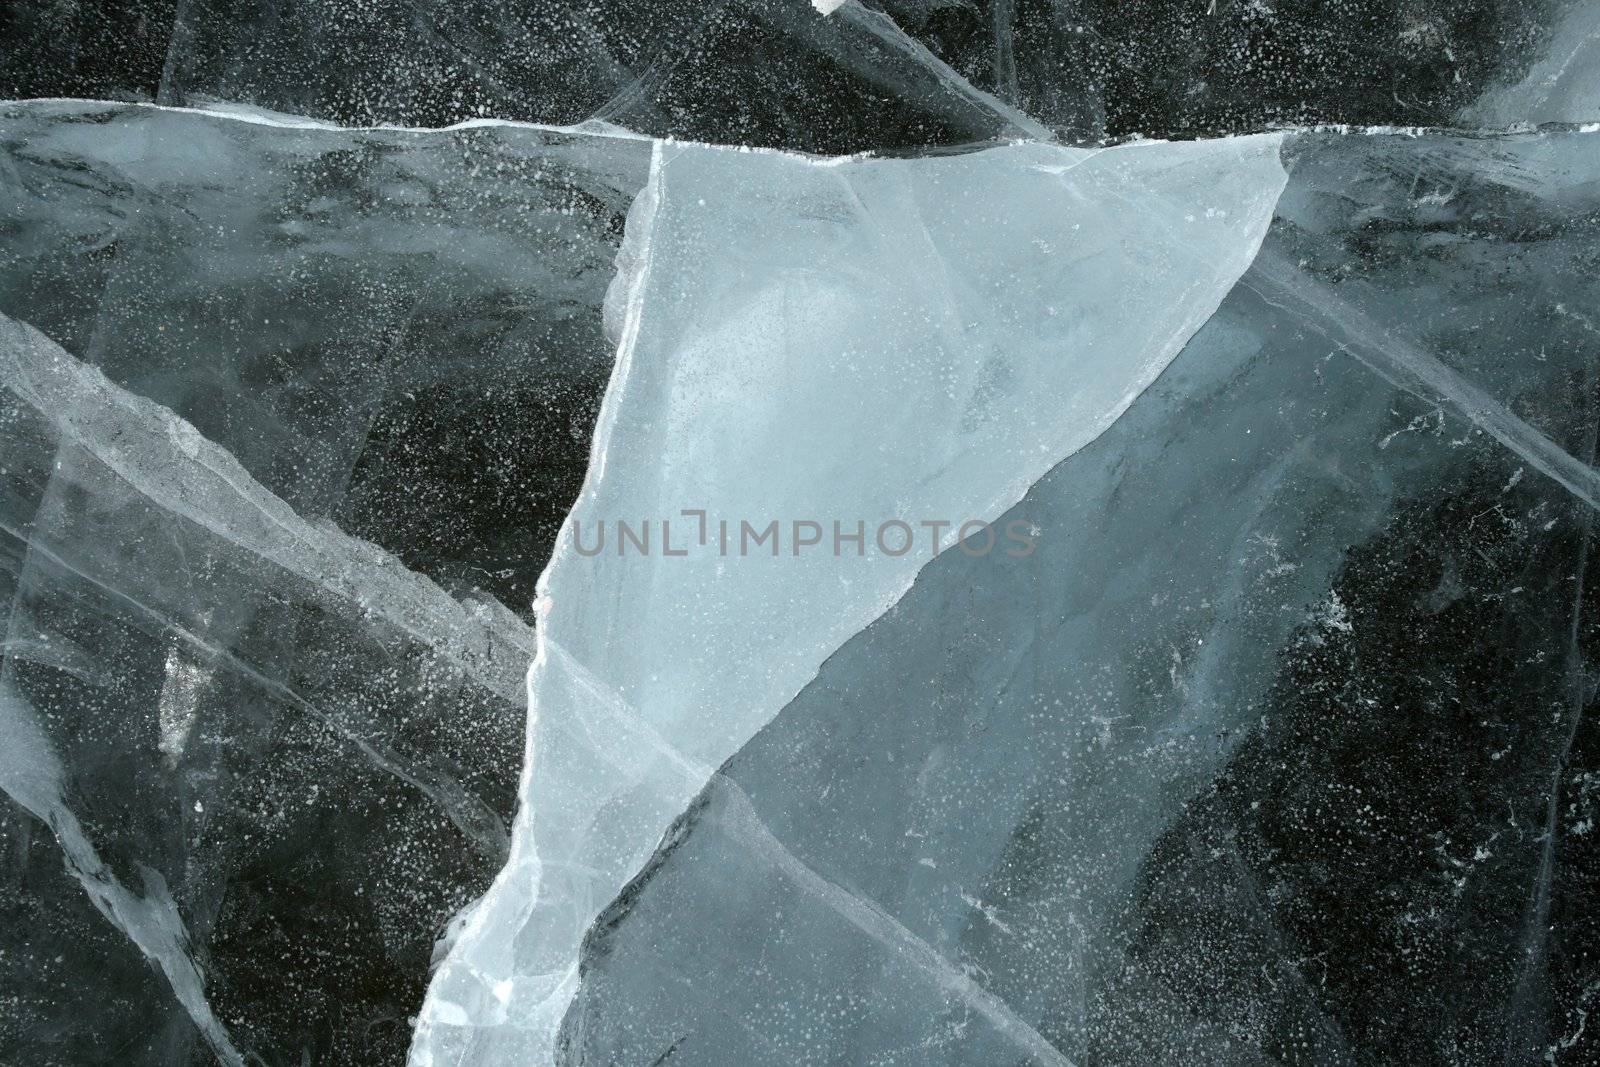 Triangular shape of a cracked ice on a frozen river.